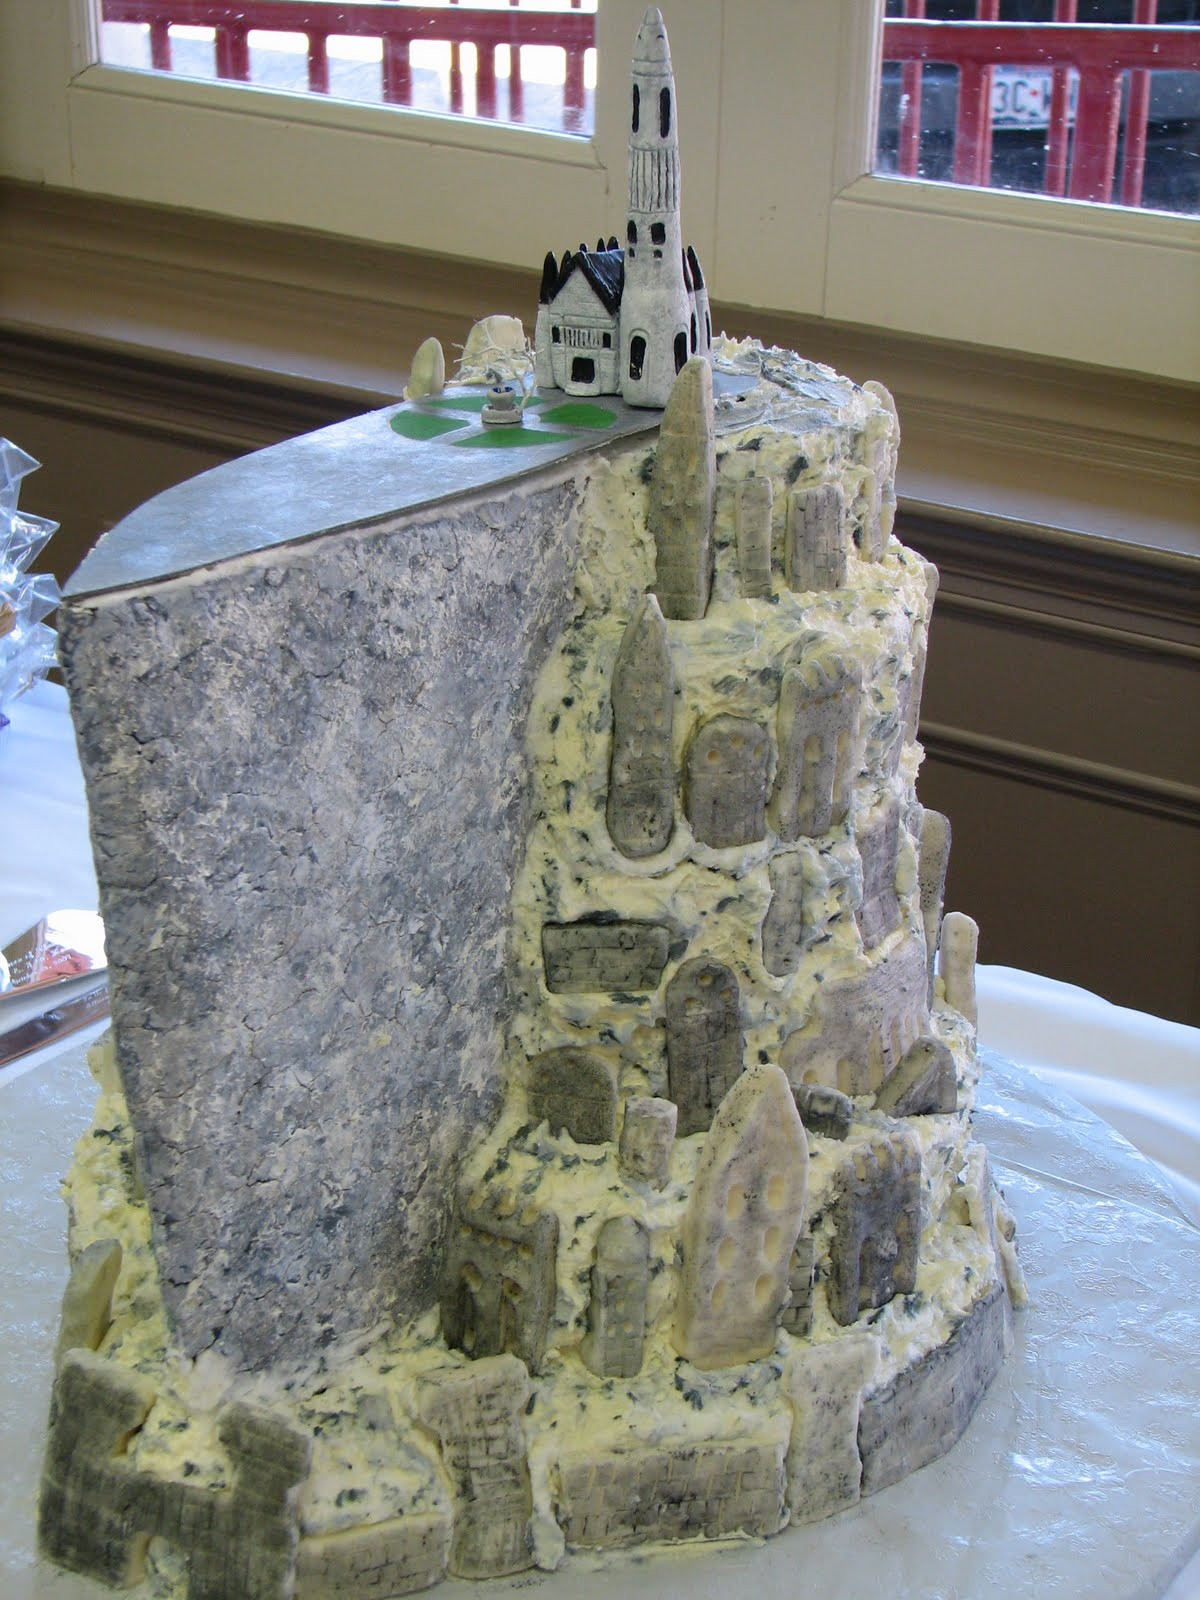 Lord Of The Rings Wedding Cake
 "Lord The Rings" Cake